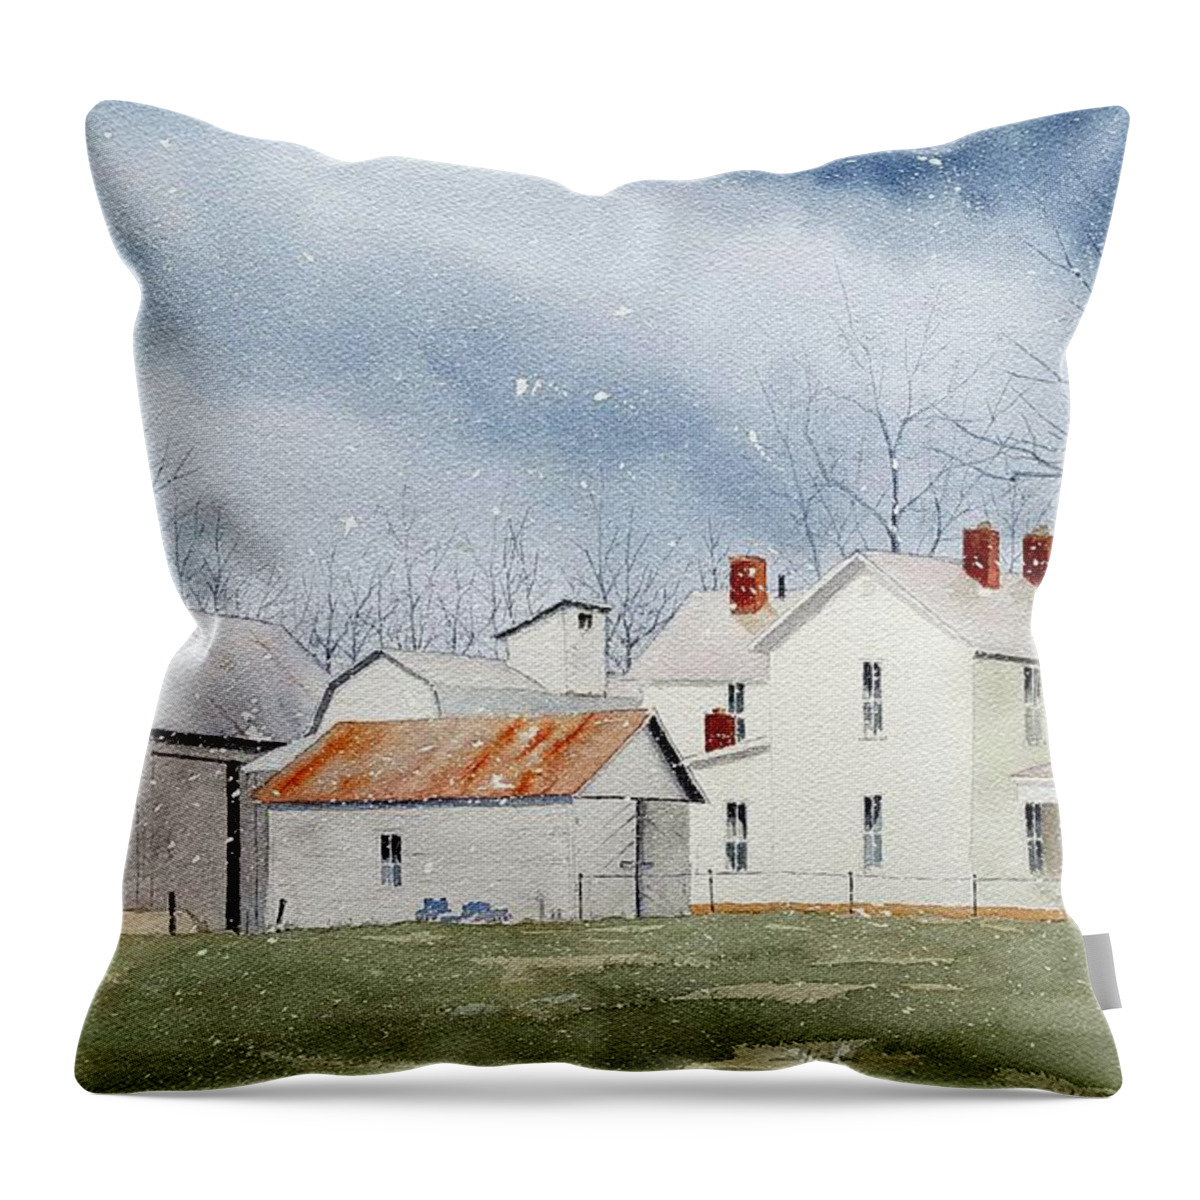 Snow Throw Pillow featuring the painting It's Snowing by Jim Gerkin